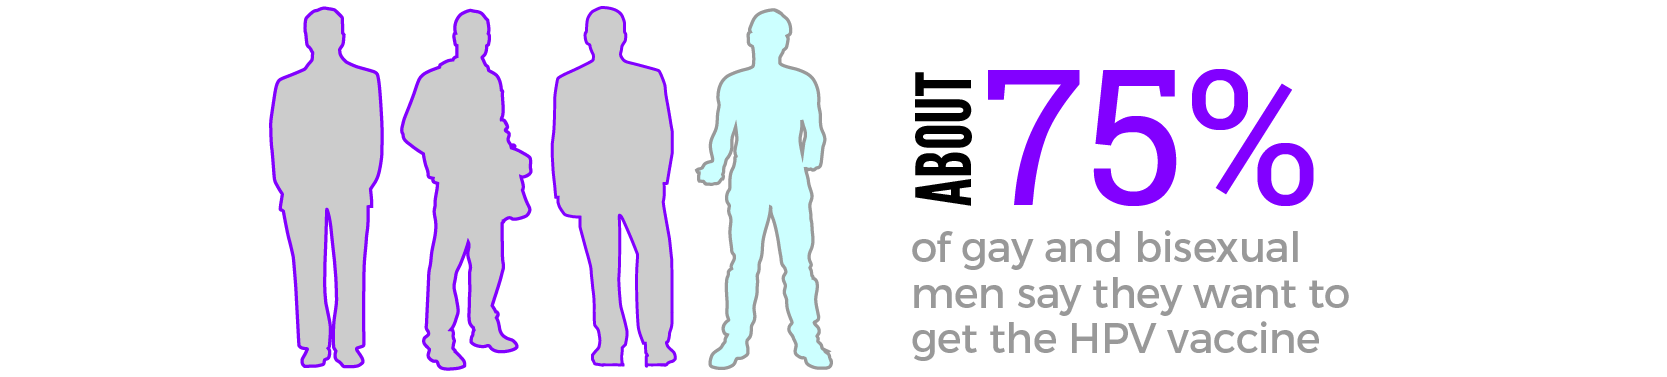 About 75% of gay and bisexual men say they want to get the HPV vaccine